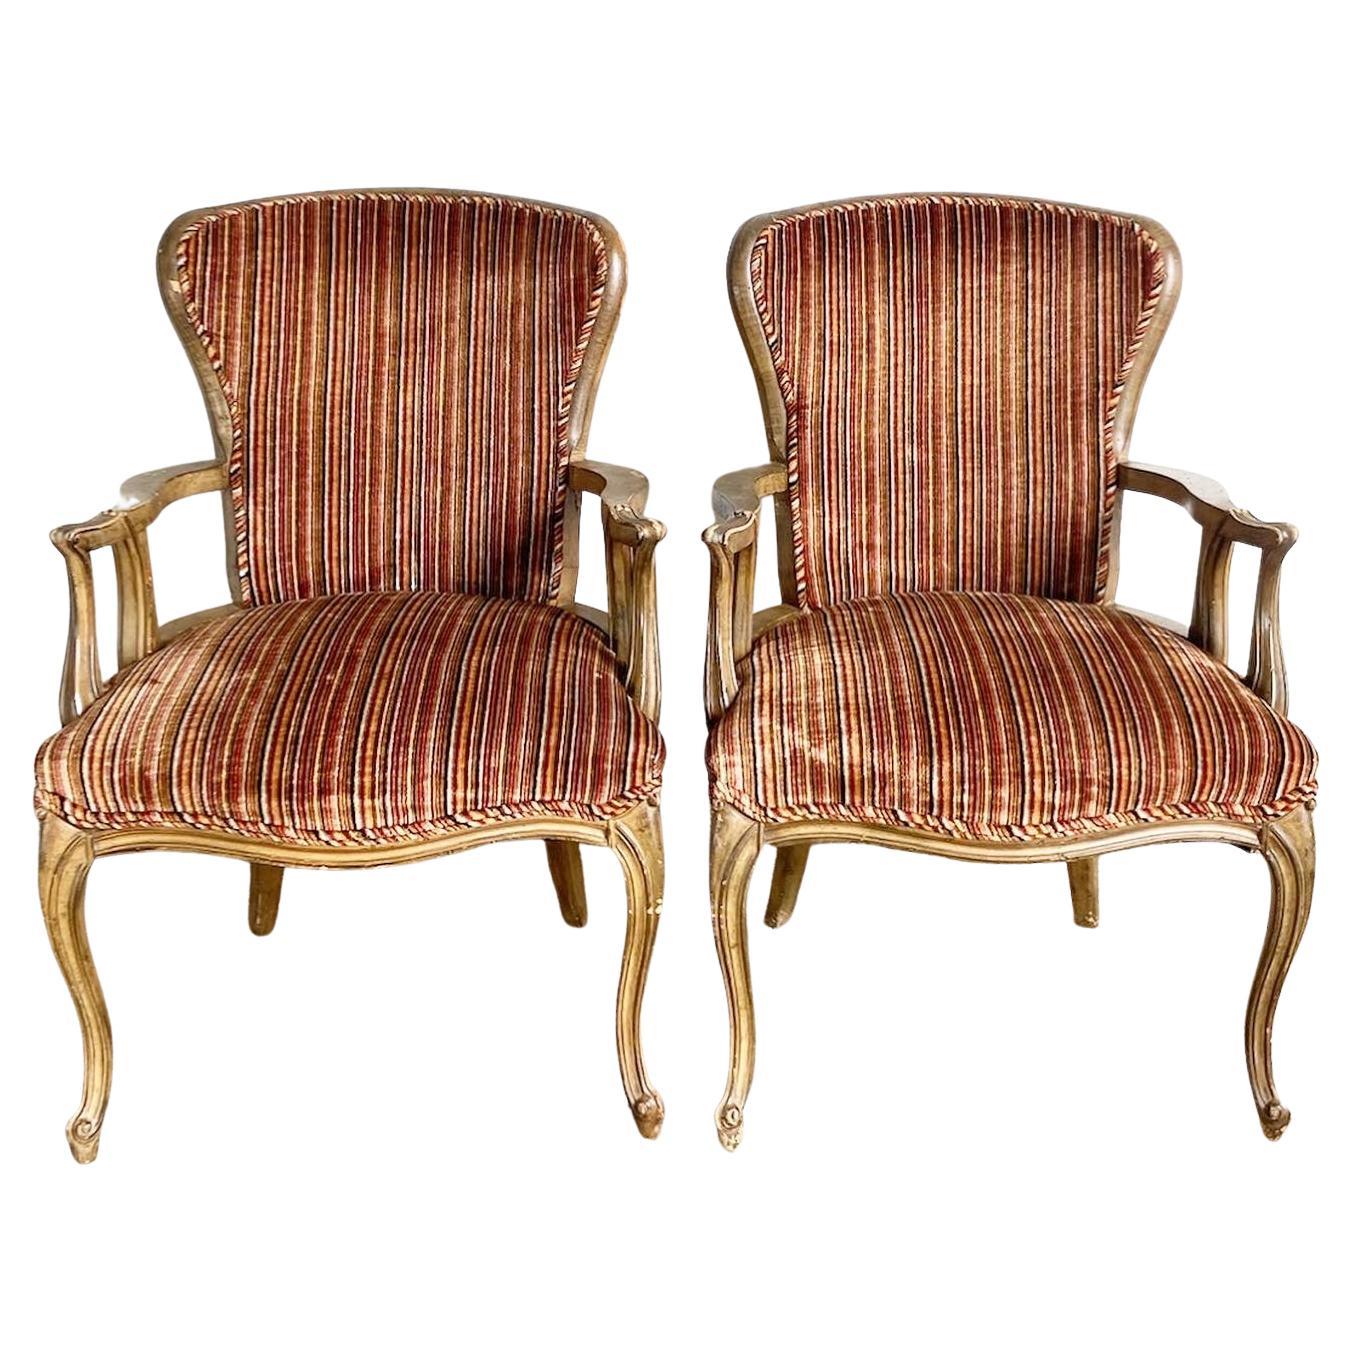 Traditional Wooden Retro Fabric Arm Chairs - a Pair For Sale